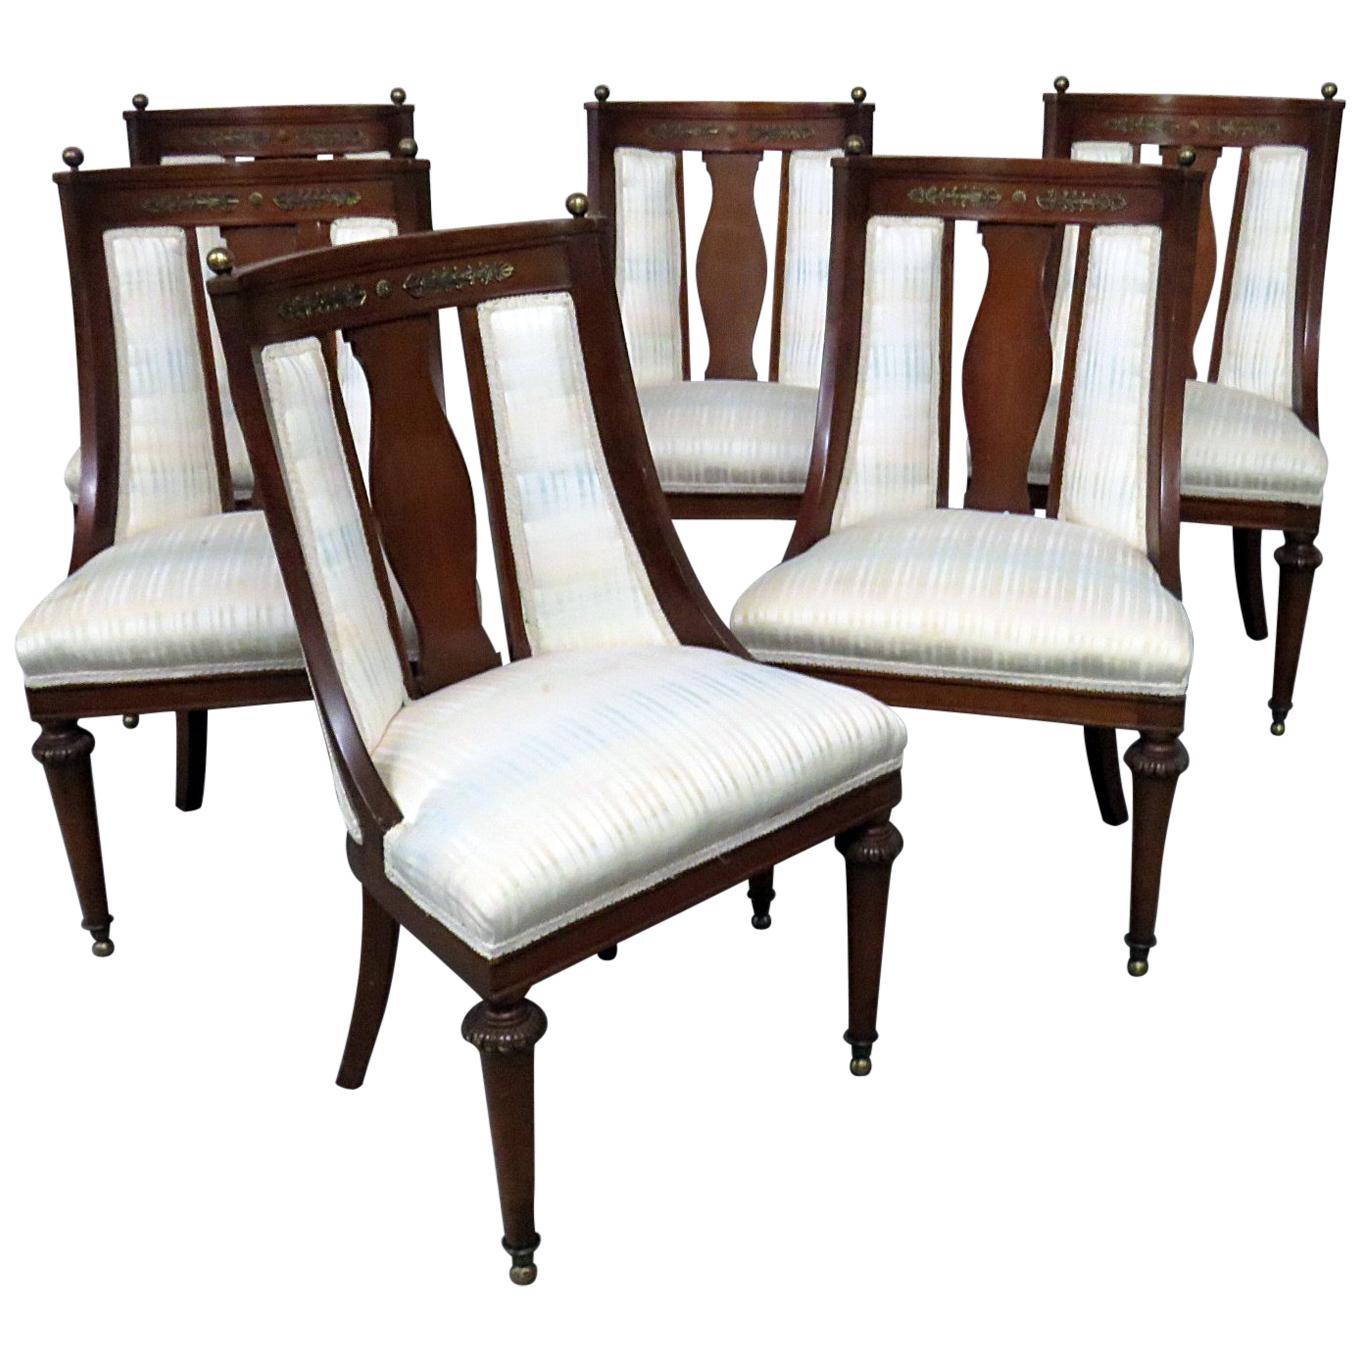 Set of 6 French Regency Style Bronze Mounted Dining Room Chairs